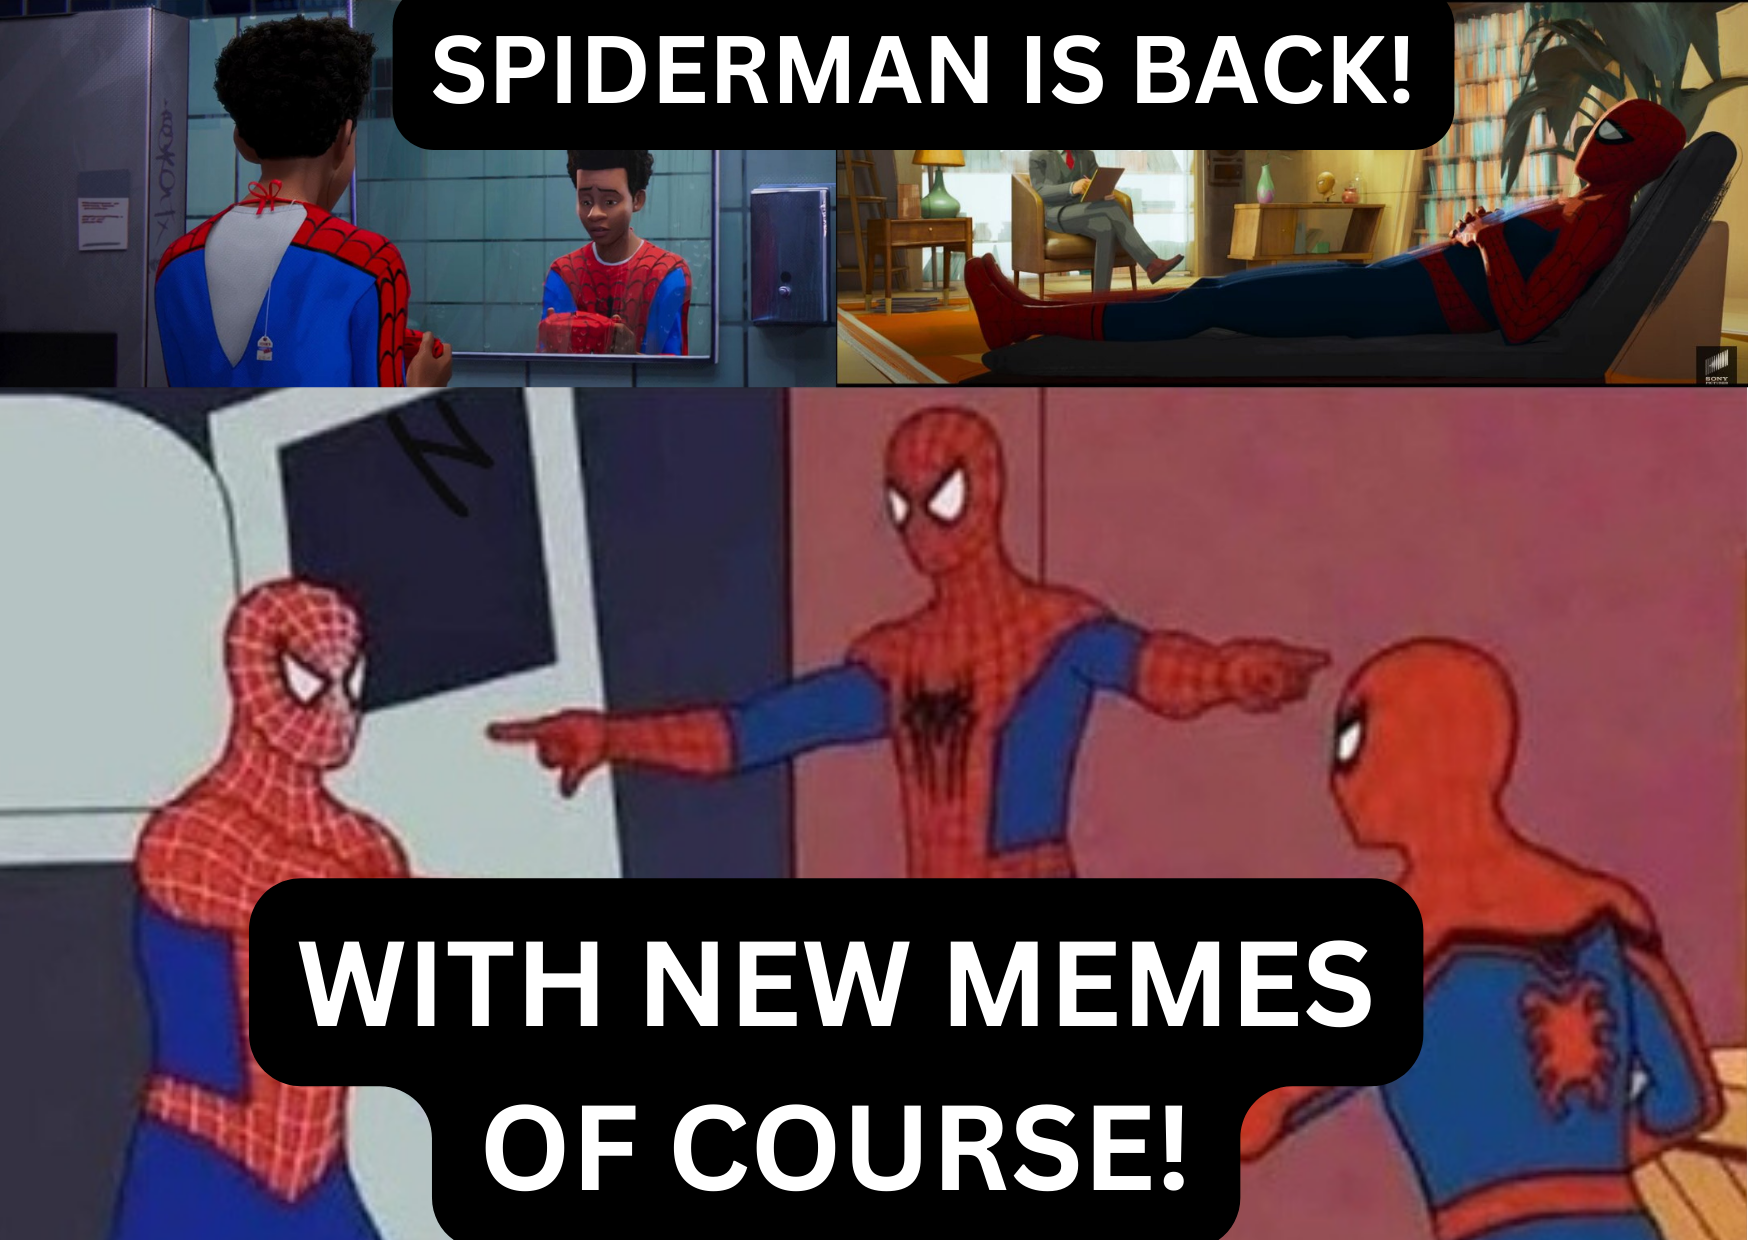 Spiderman: Memes run in all the universes